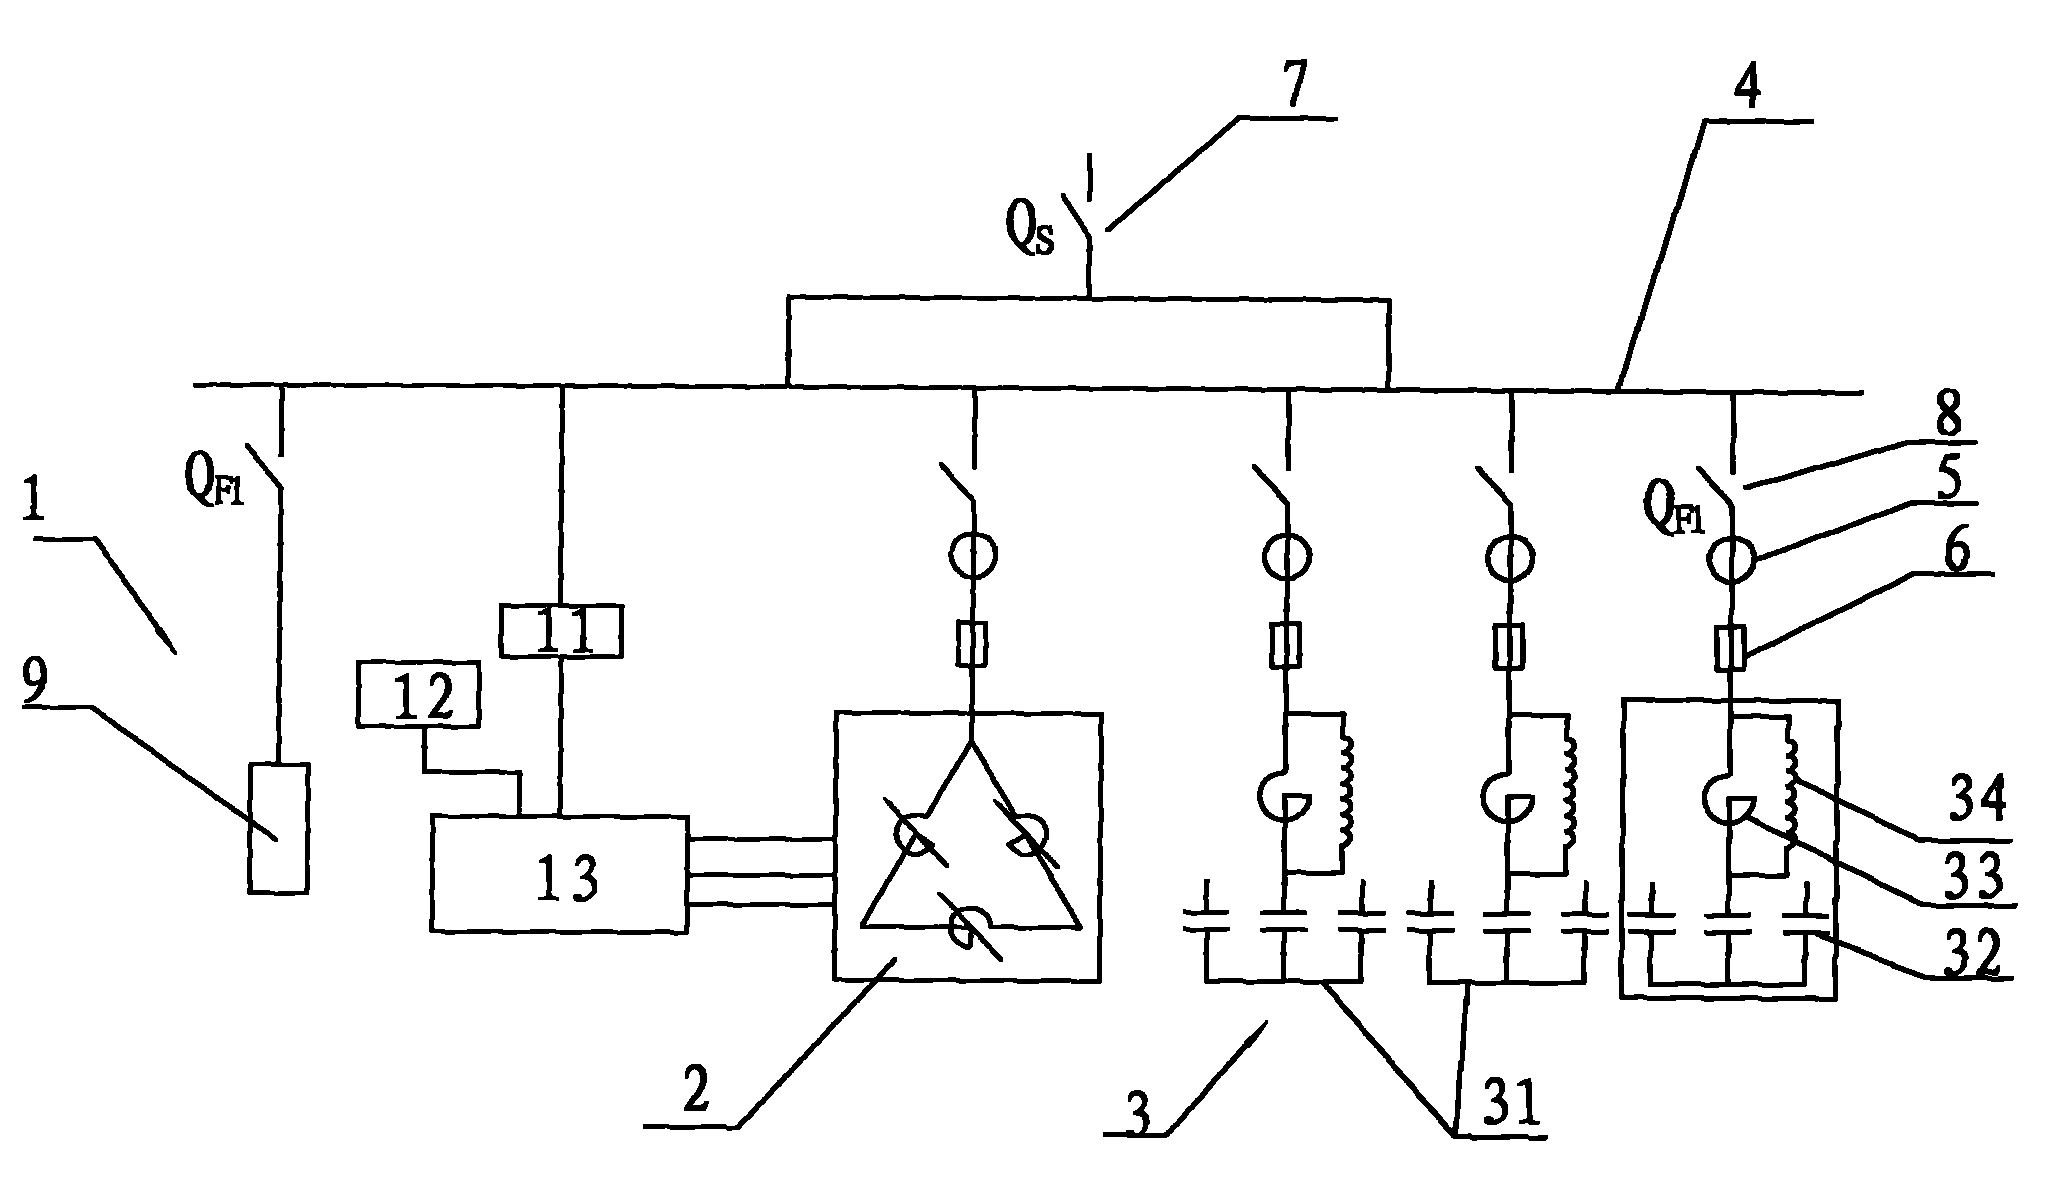 Reactive compensation system of thyristor controlled magnetically controlled reactor